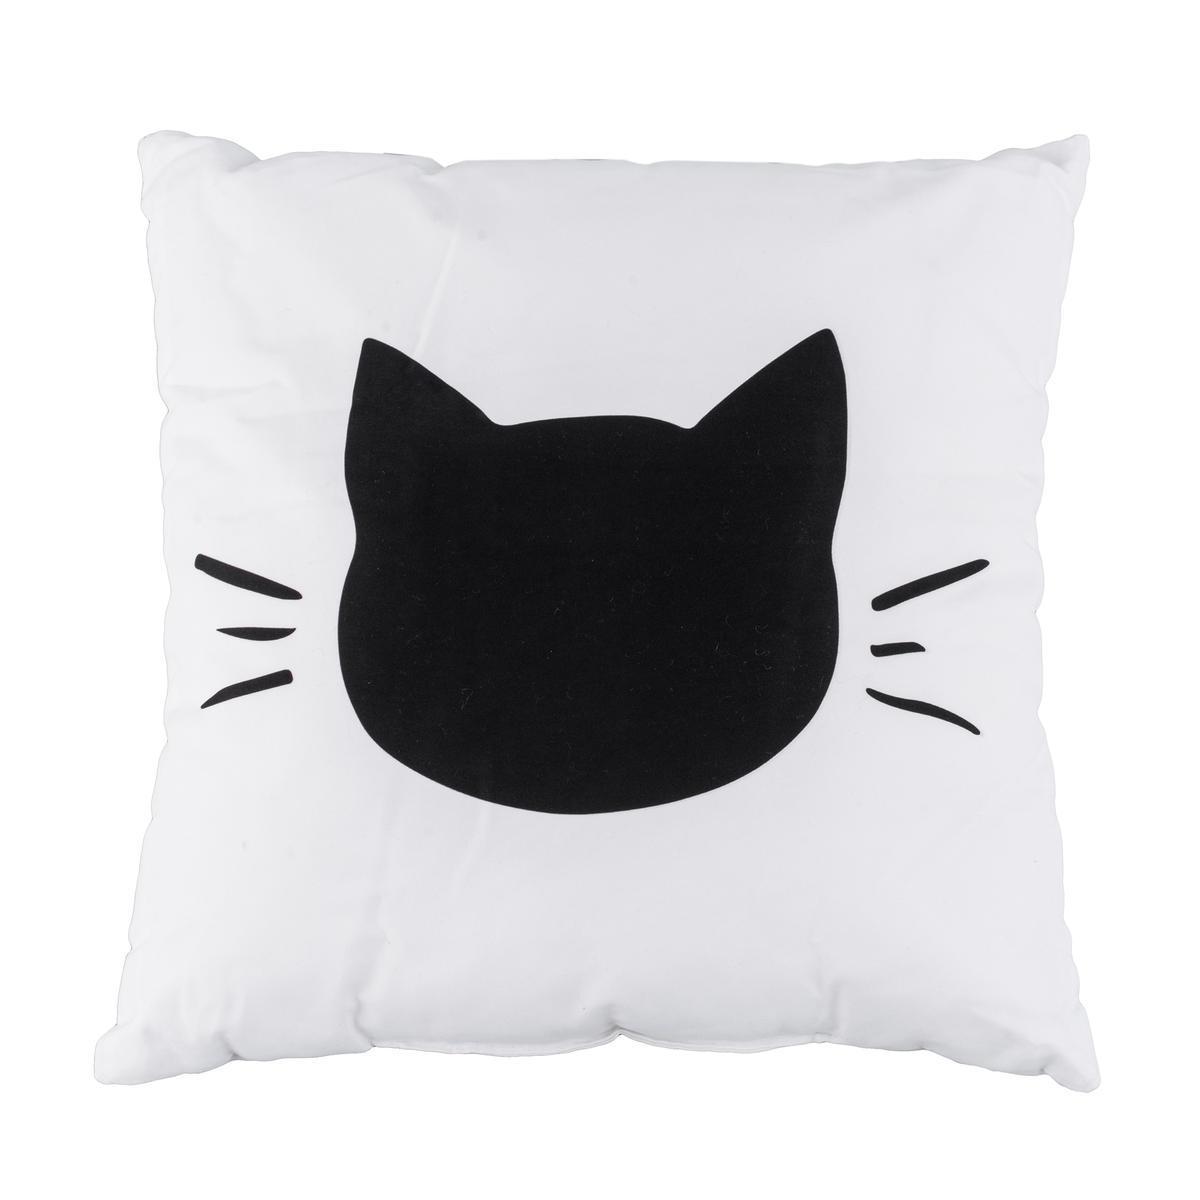 Coussin Chat